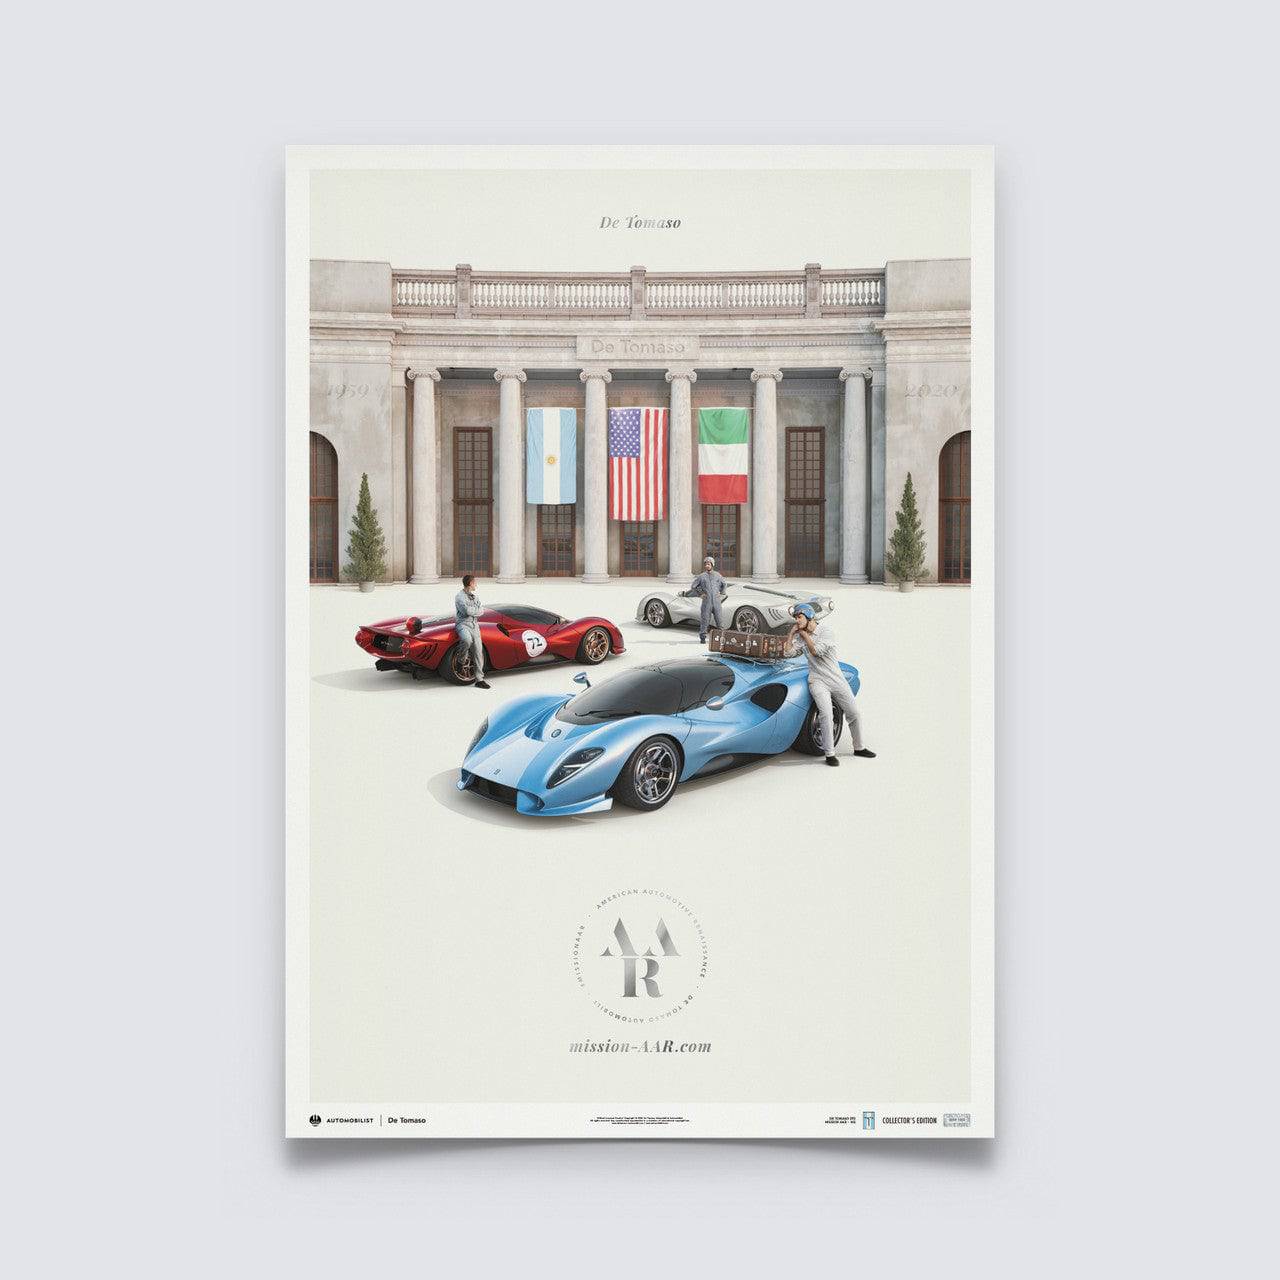 De Tomaso - Mission AAR - Our Roots meet our Future | Collector’s Edition